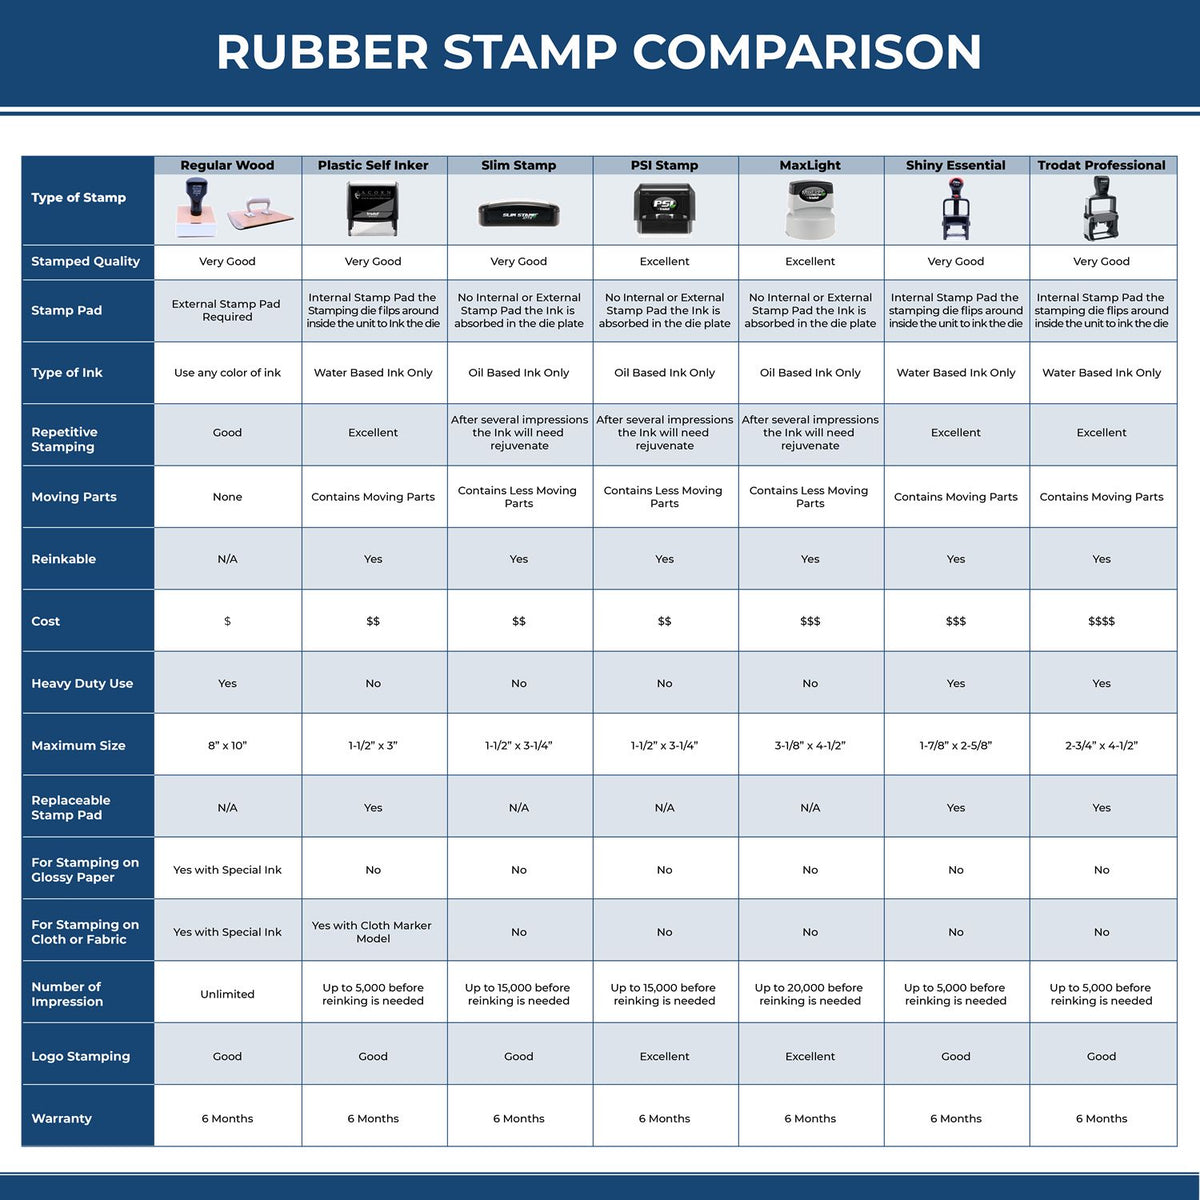 A comparison chart for the different types of mount models available for the Wooden Handle Arkansas Rectangular Notary Public Stamp.